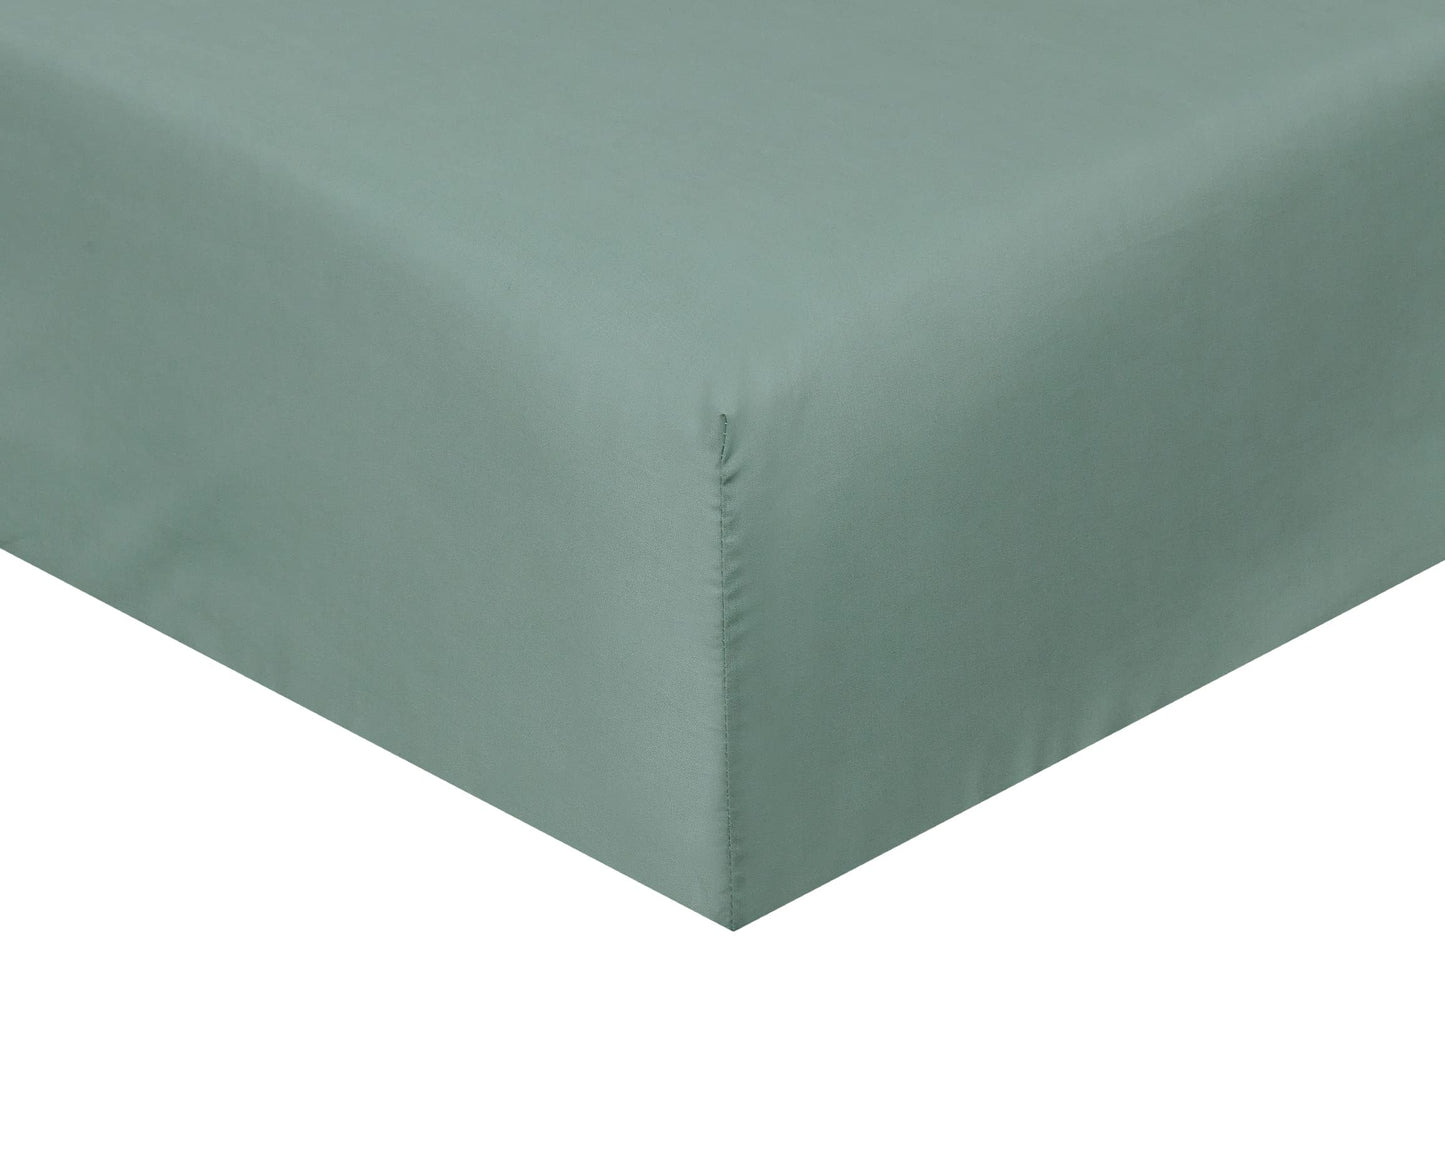 Easy Care - Deep Fitted Sheet